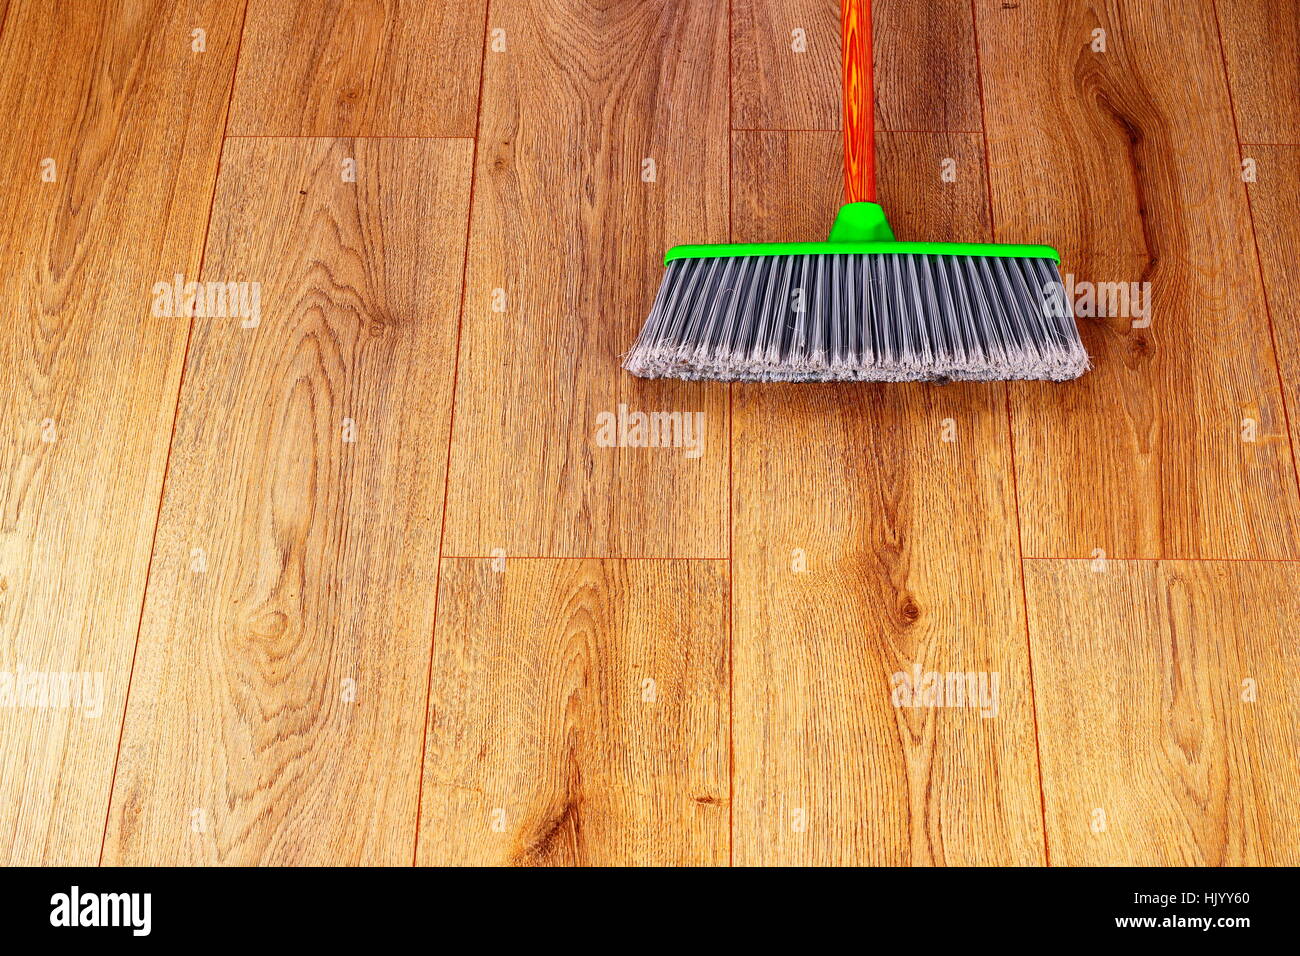 cleaning the interior wooden floor with green plastic broom Stock Photo